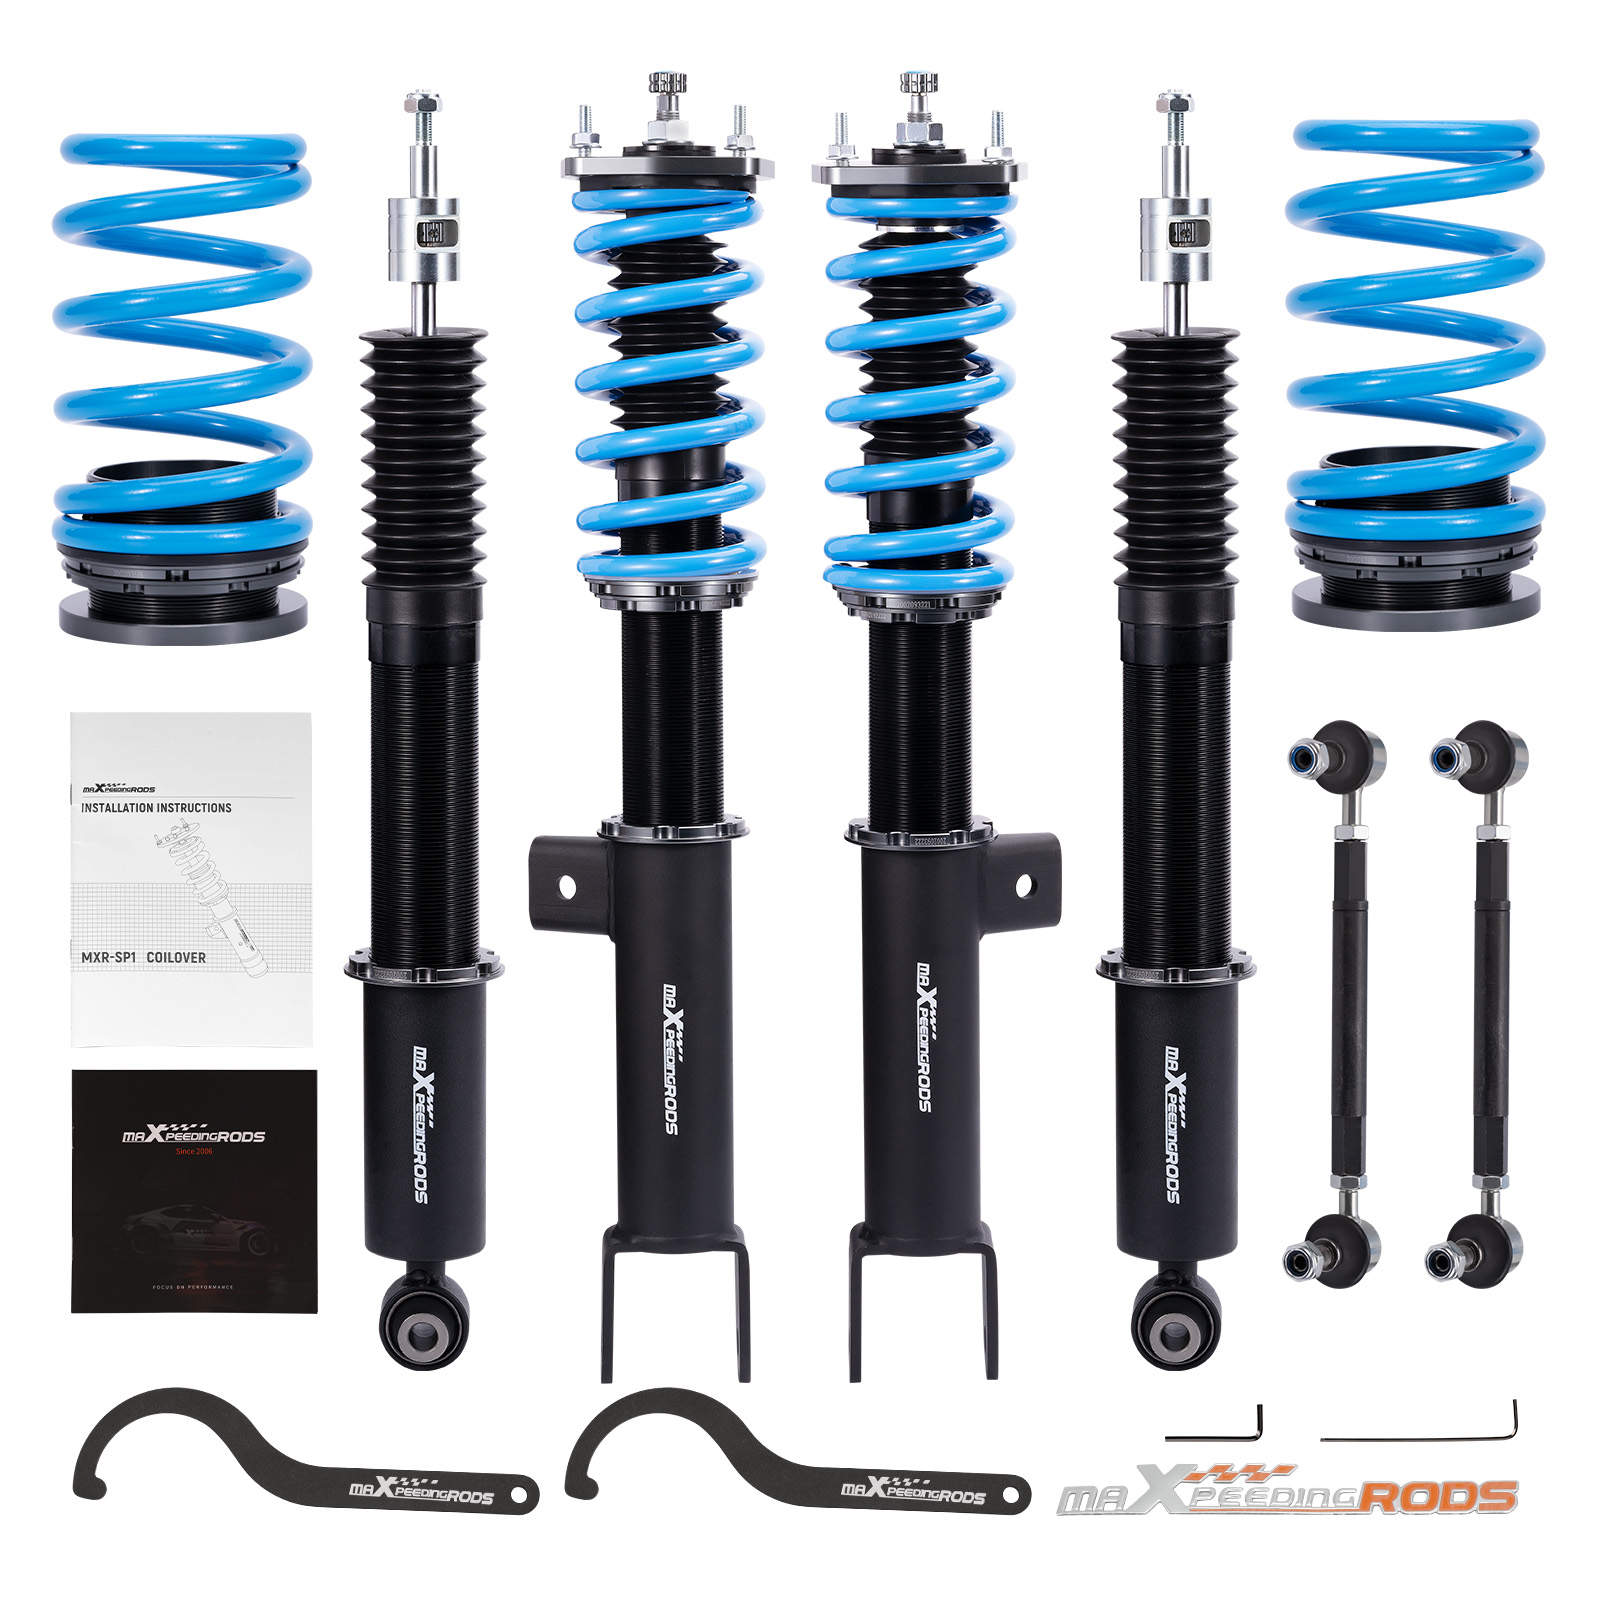 MaXpeedingRods $300  Coilovers - Comparison and Long Term